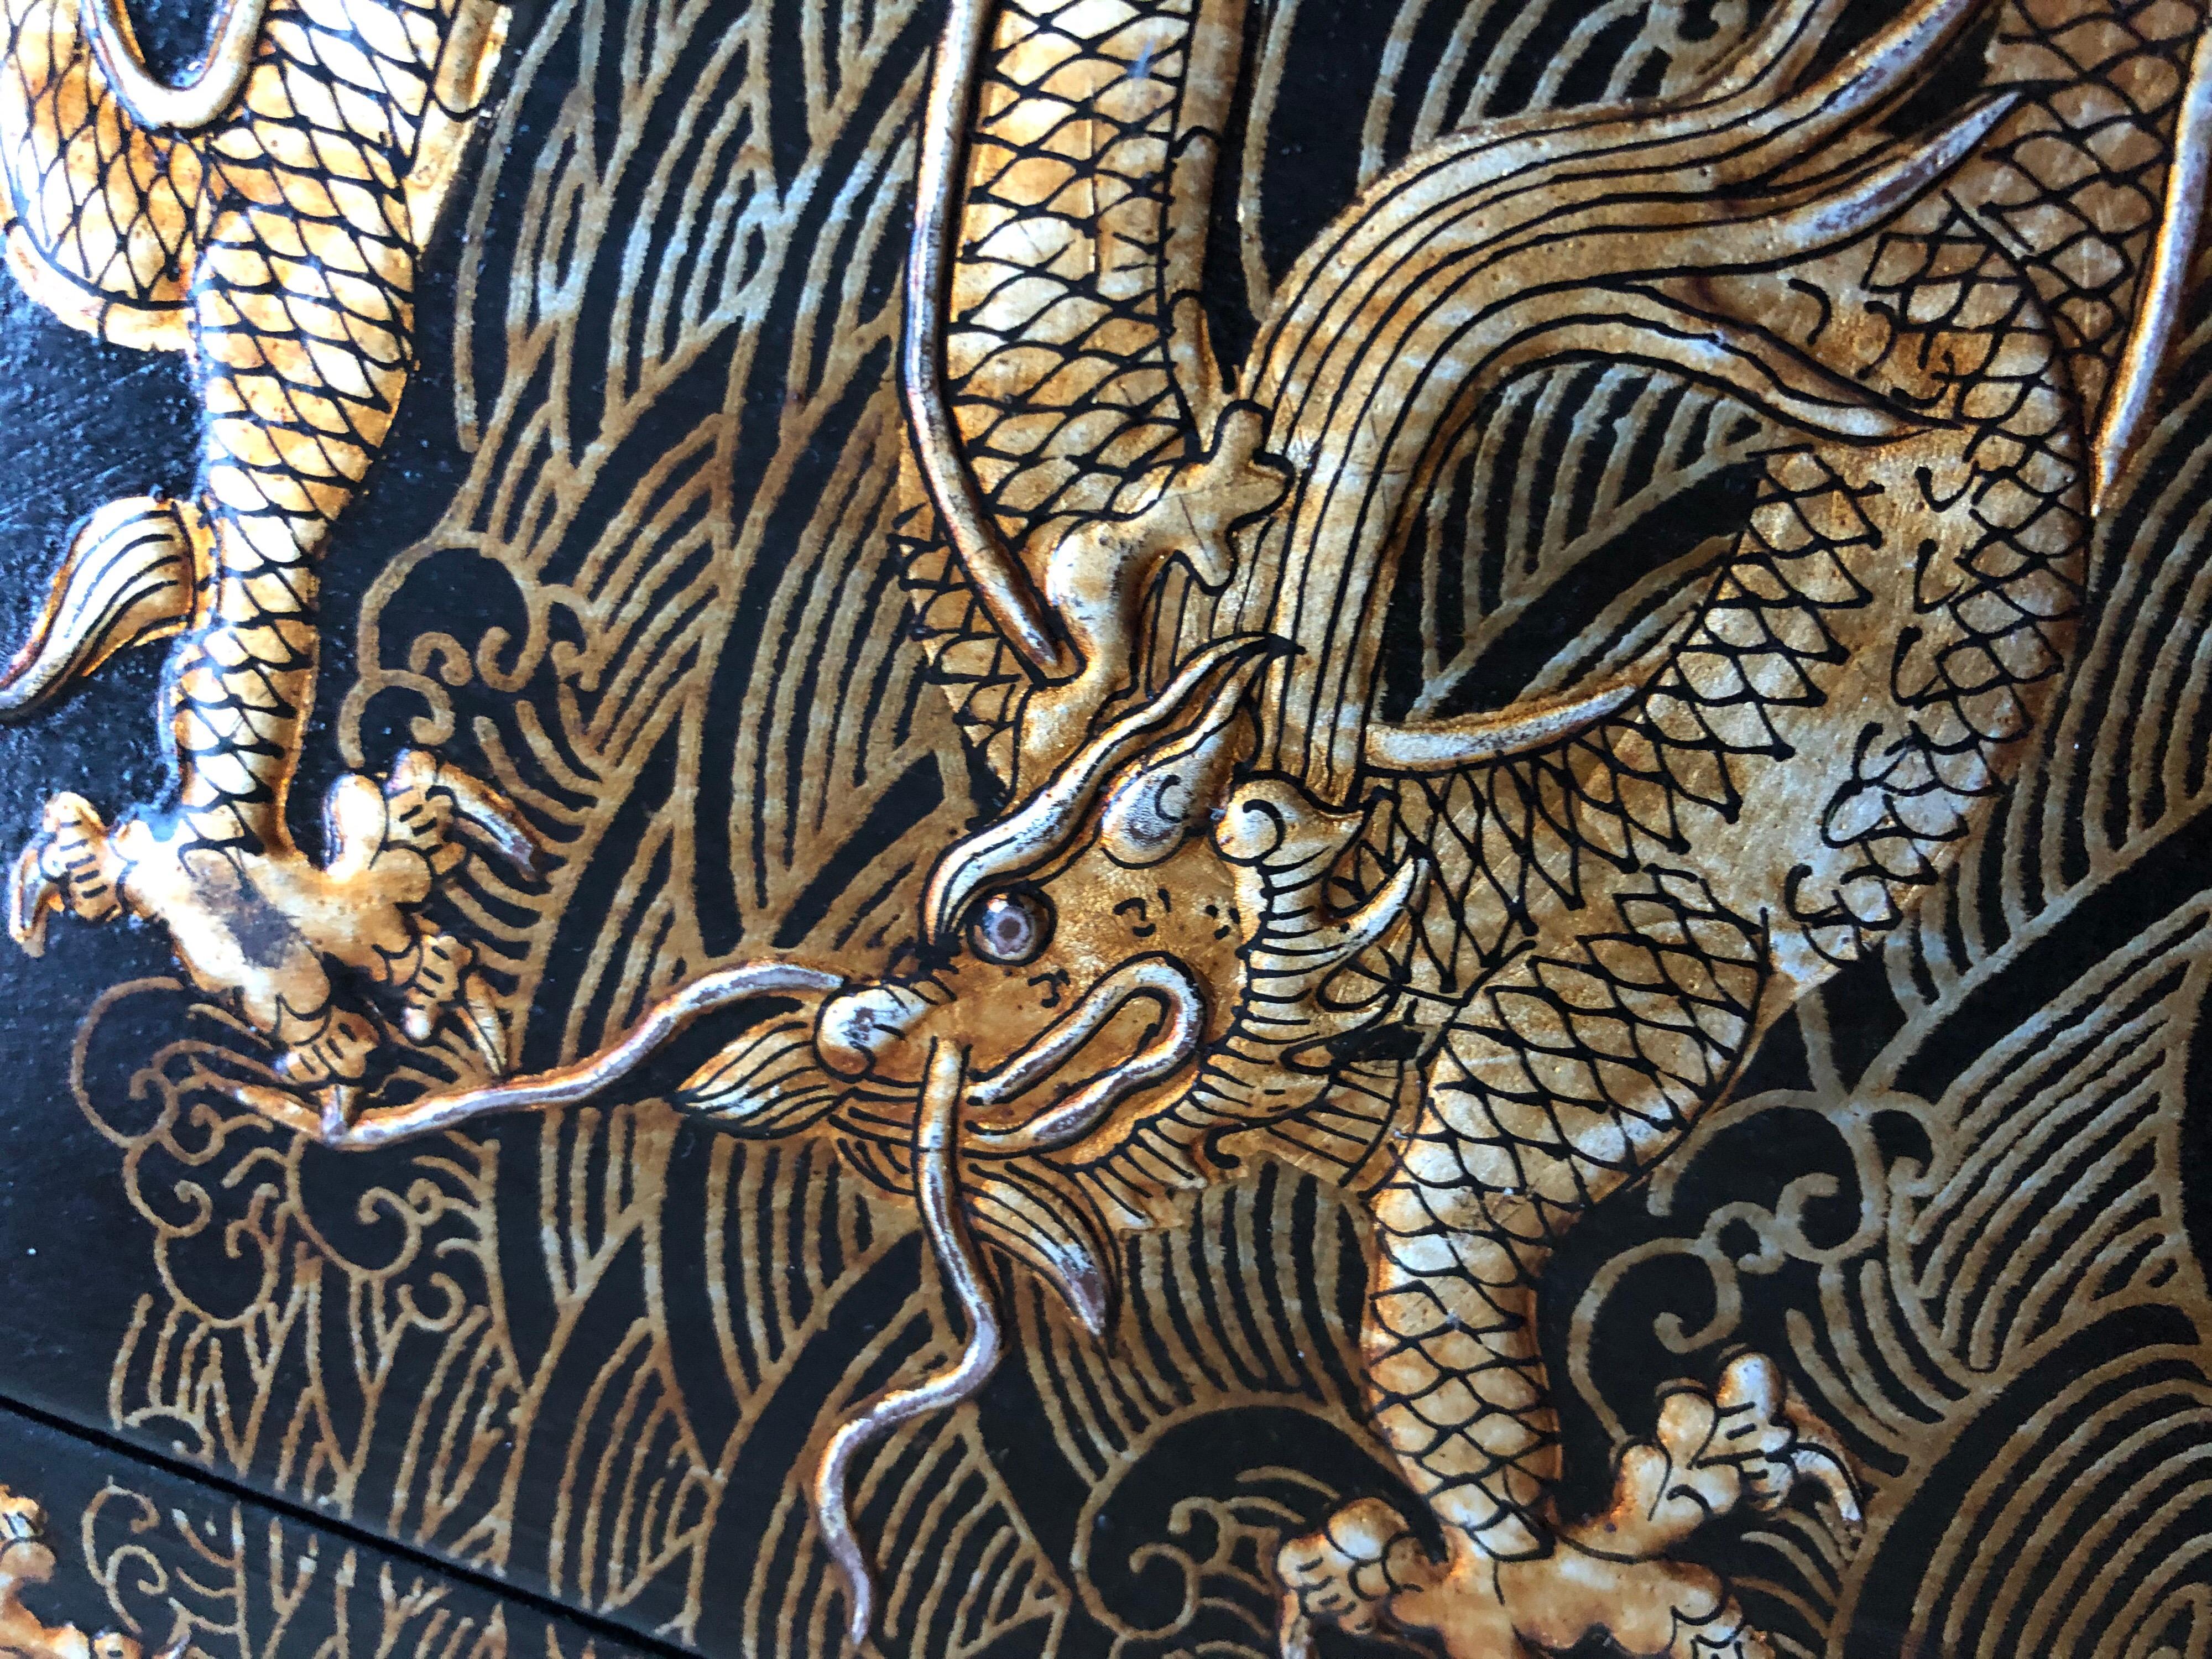 Set of 9 Hand Painted Lacquered Chinese Gold Dragon Wall Panels (Holz)